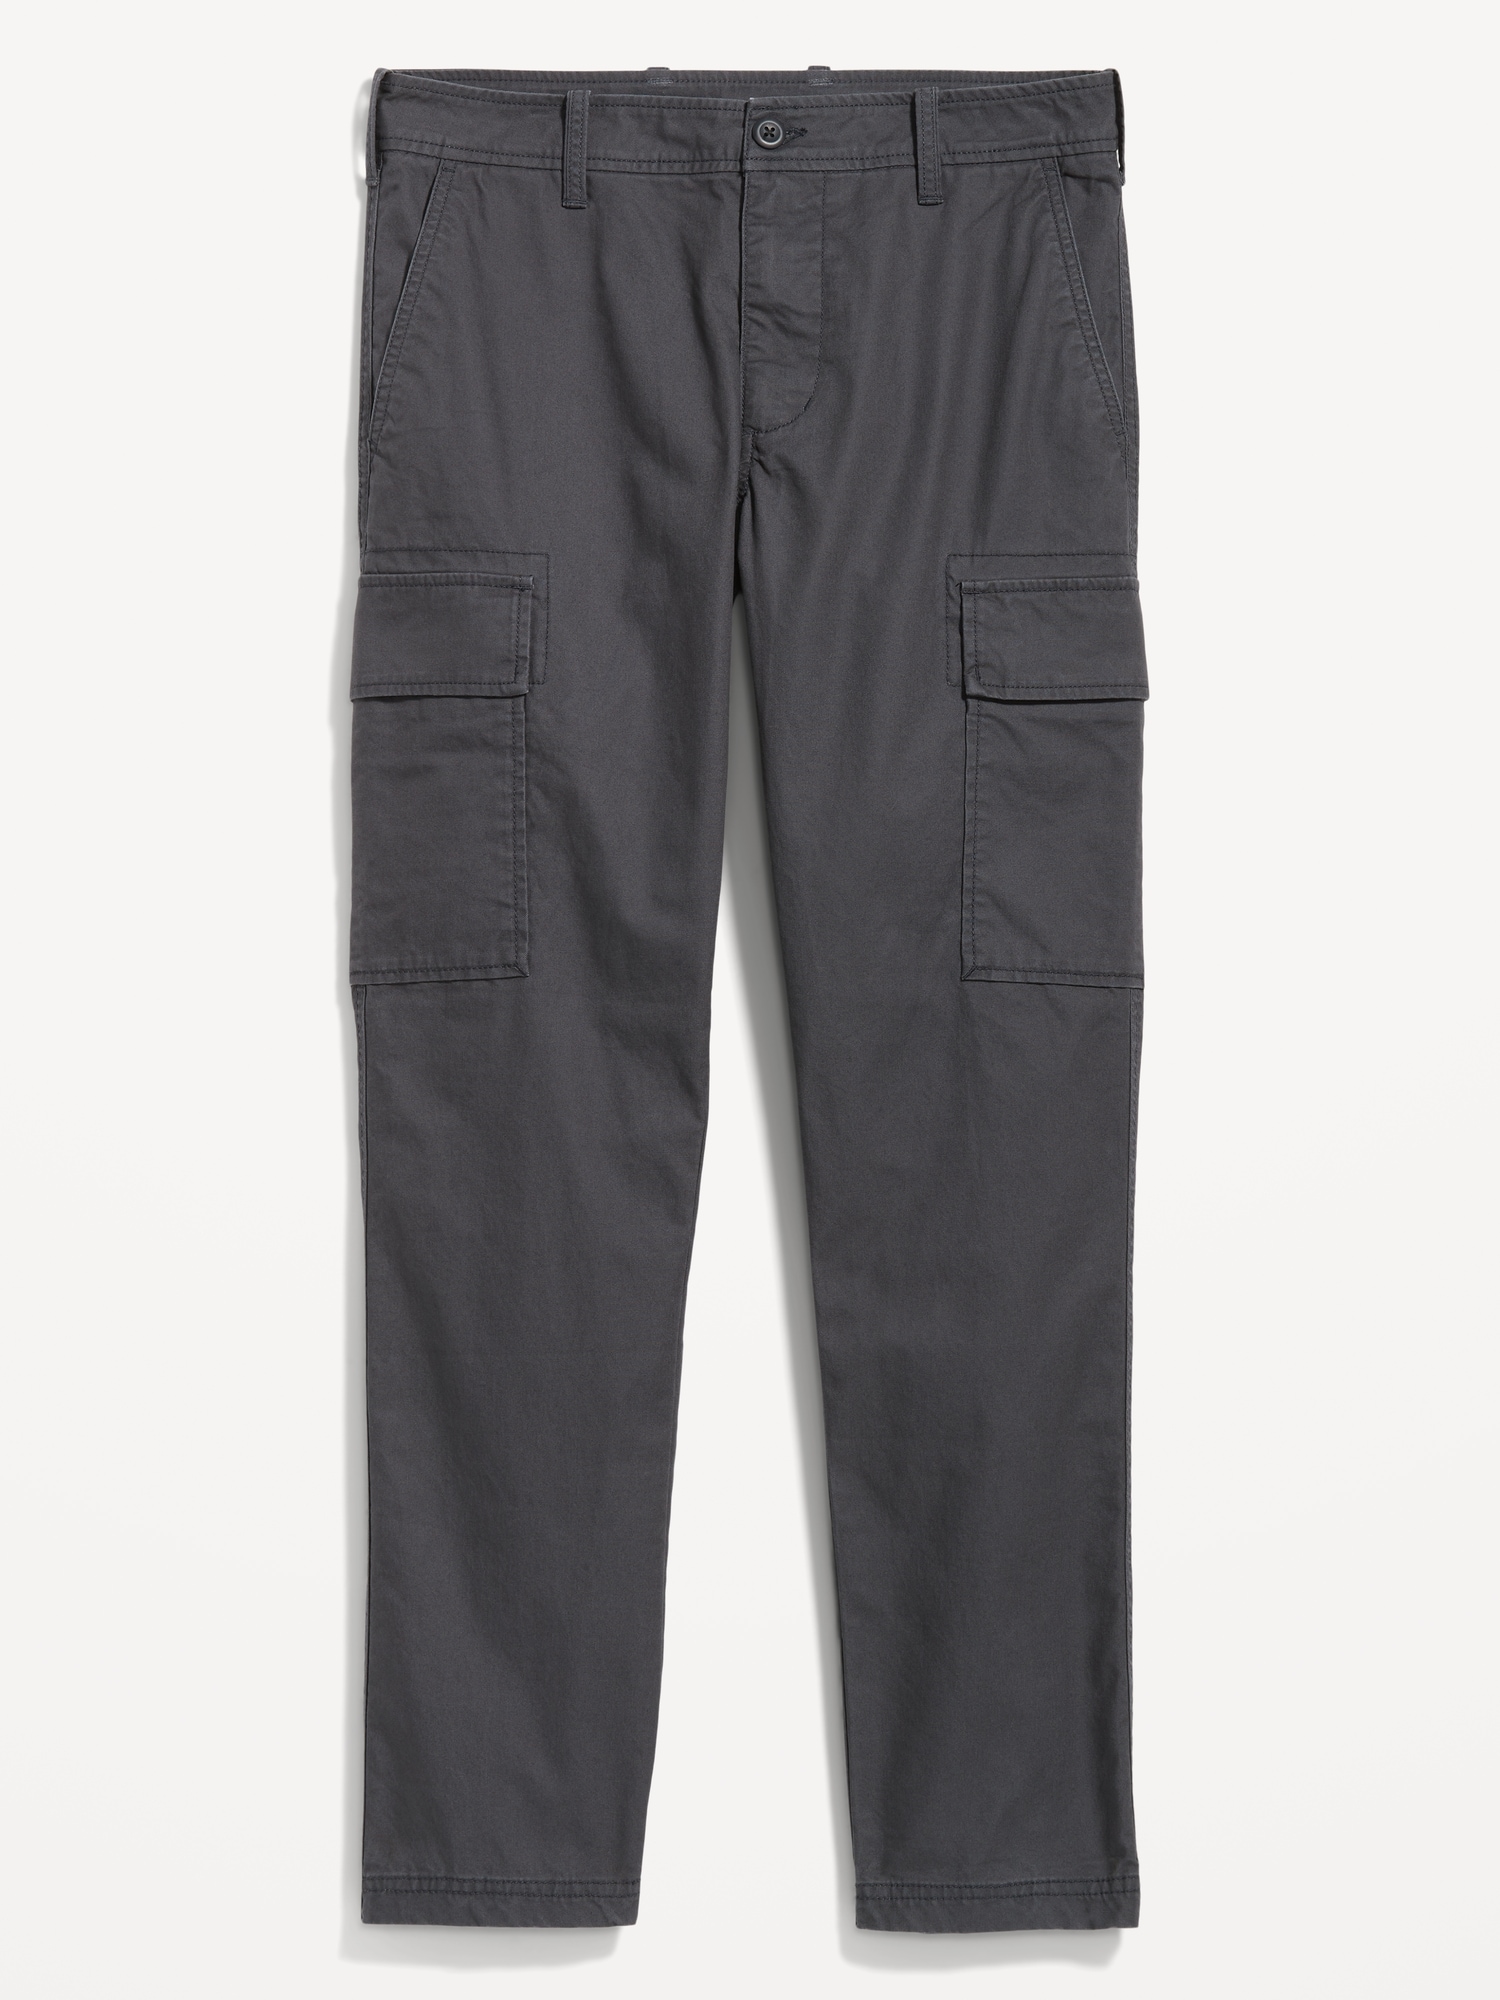 Old Navy Cargo Pants products for sale  eBay